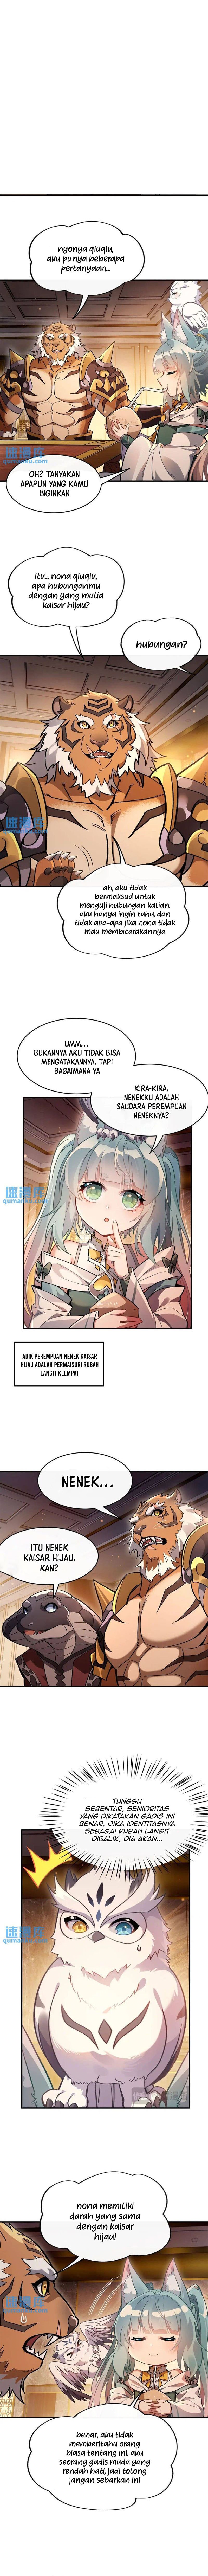 Dilarang COPAS - situs resmi www.mangacanblog.com - Komik my female apprentices are all big shots from the future 205 - chapter 205 206 Indonesia my female apprentices are all big shots from the future 205 - chapter 205 Terbaru 4|Baca Manga Komik Indonesia|Mangacan